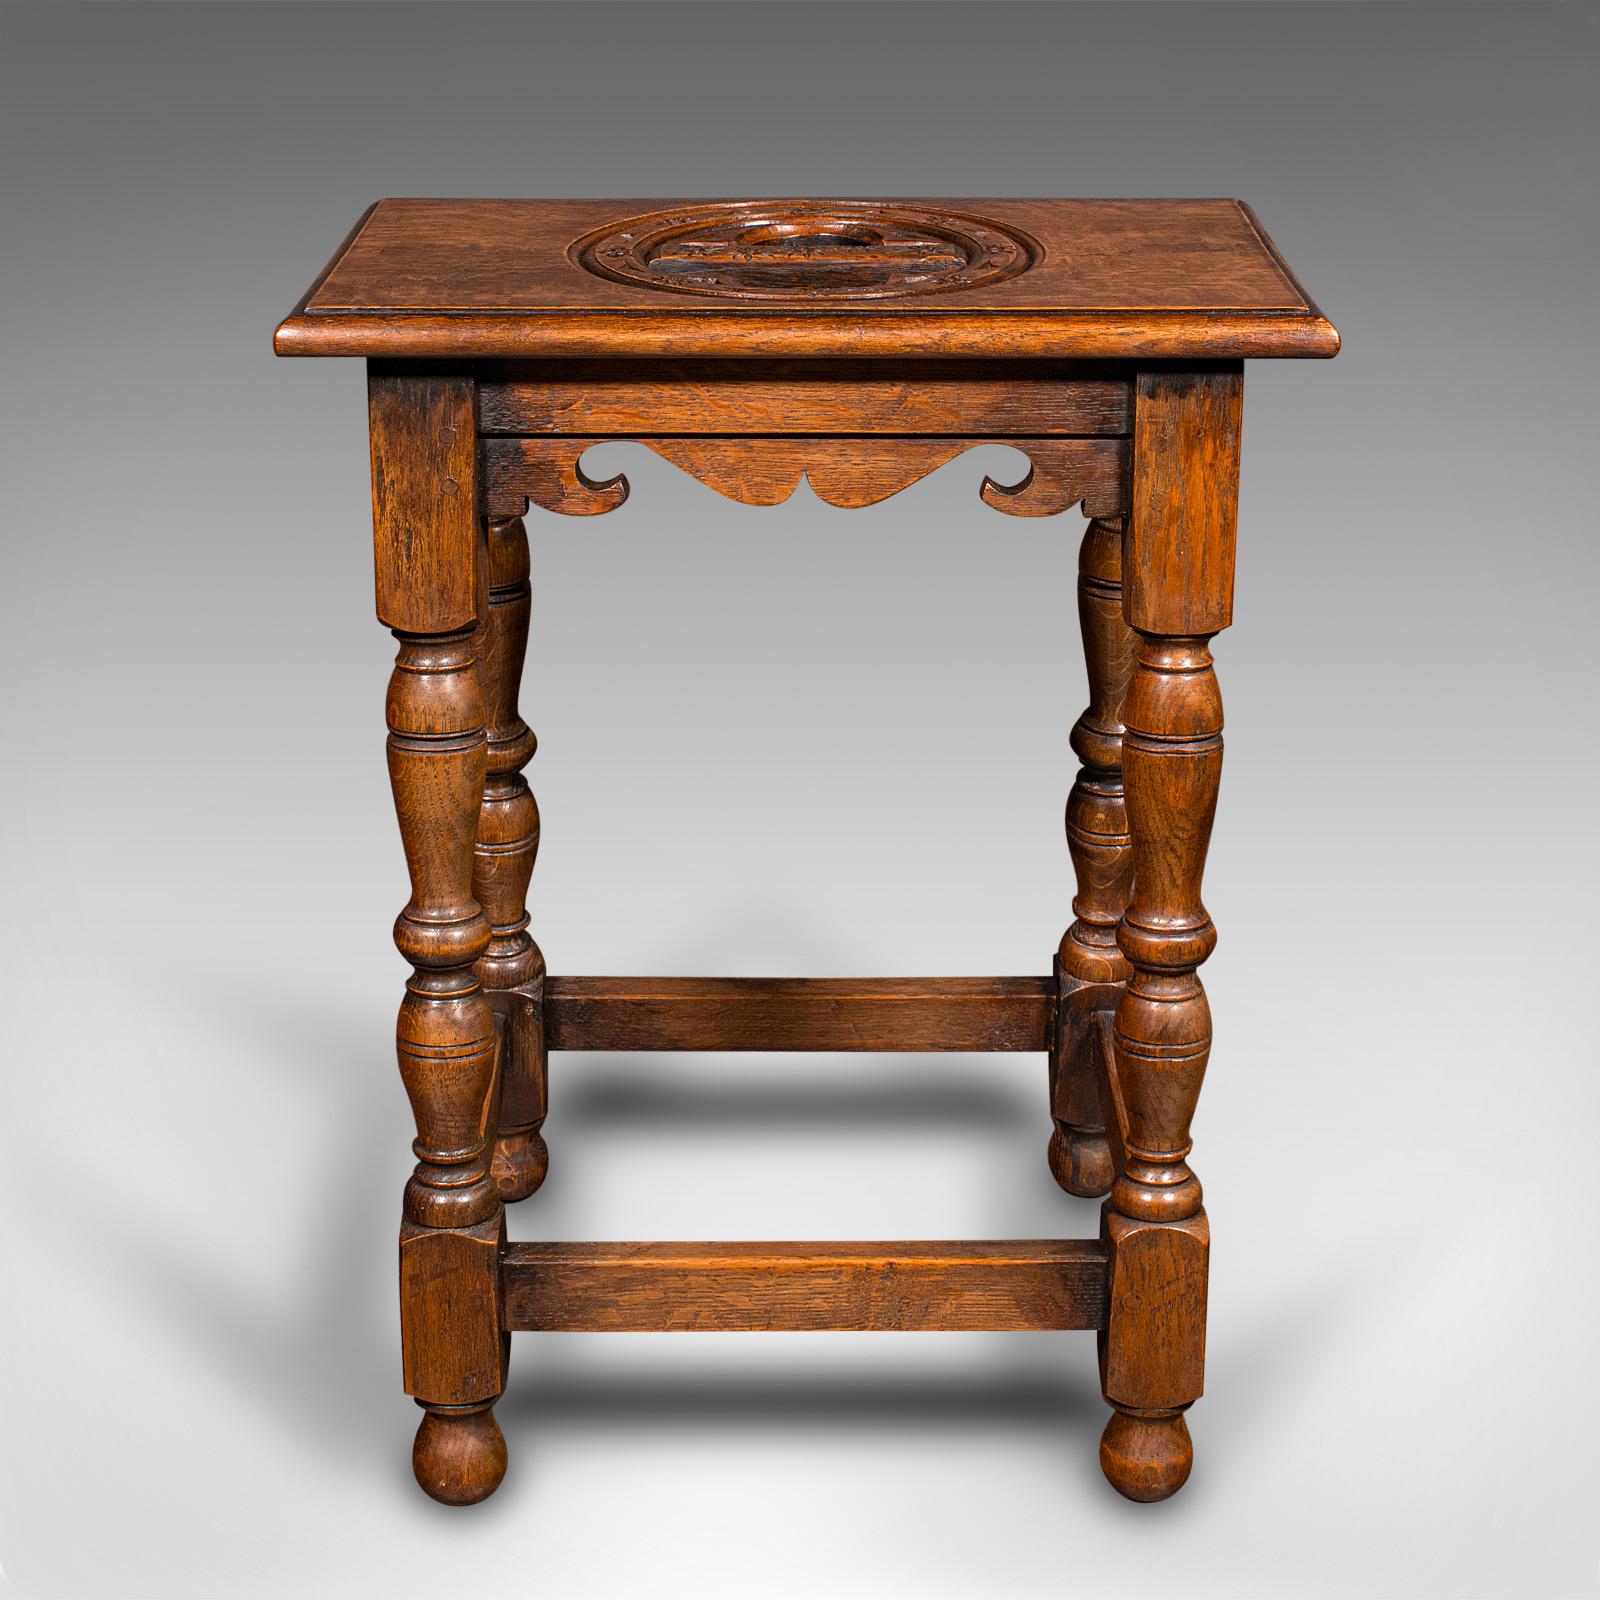 This is an antique verger's stool. An English, oak side or hall stool with ecclesiastical taste, dating to the late Victorian period, circa 1900.

Pleasingly petite and with a delightful carved appearance
Displays a desirable aged patina and in very